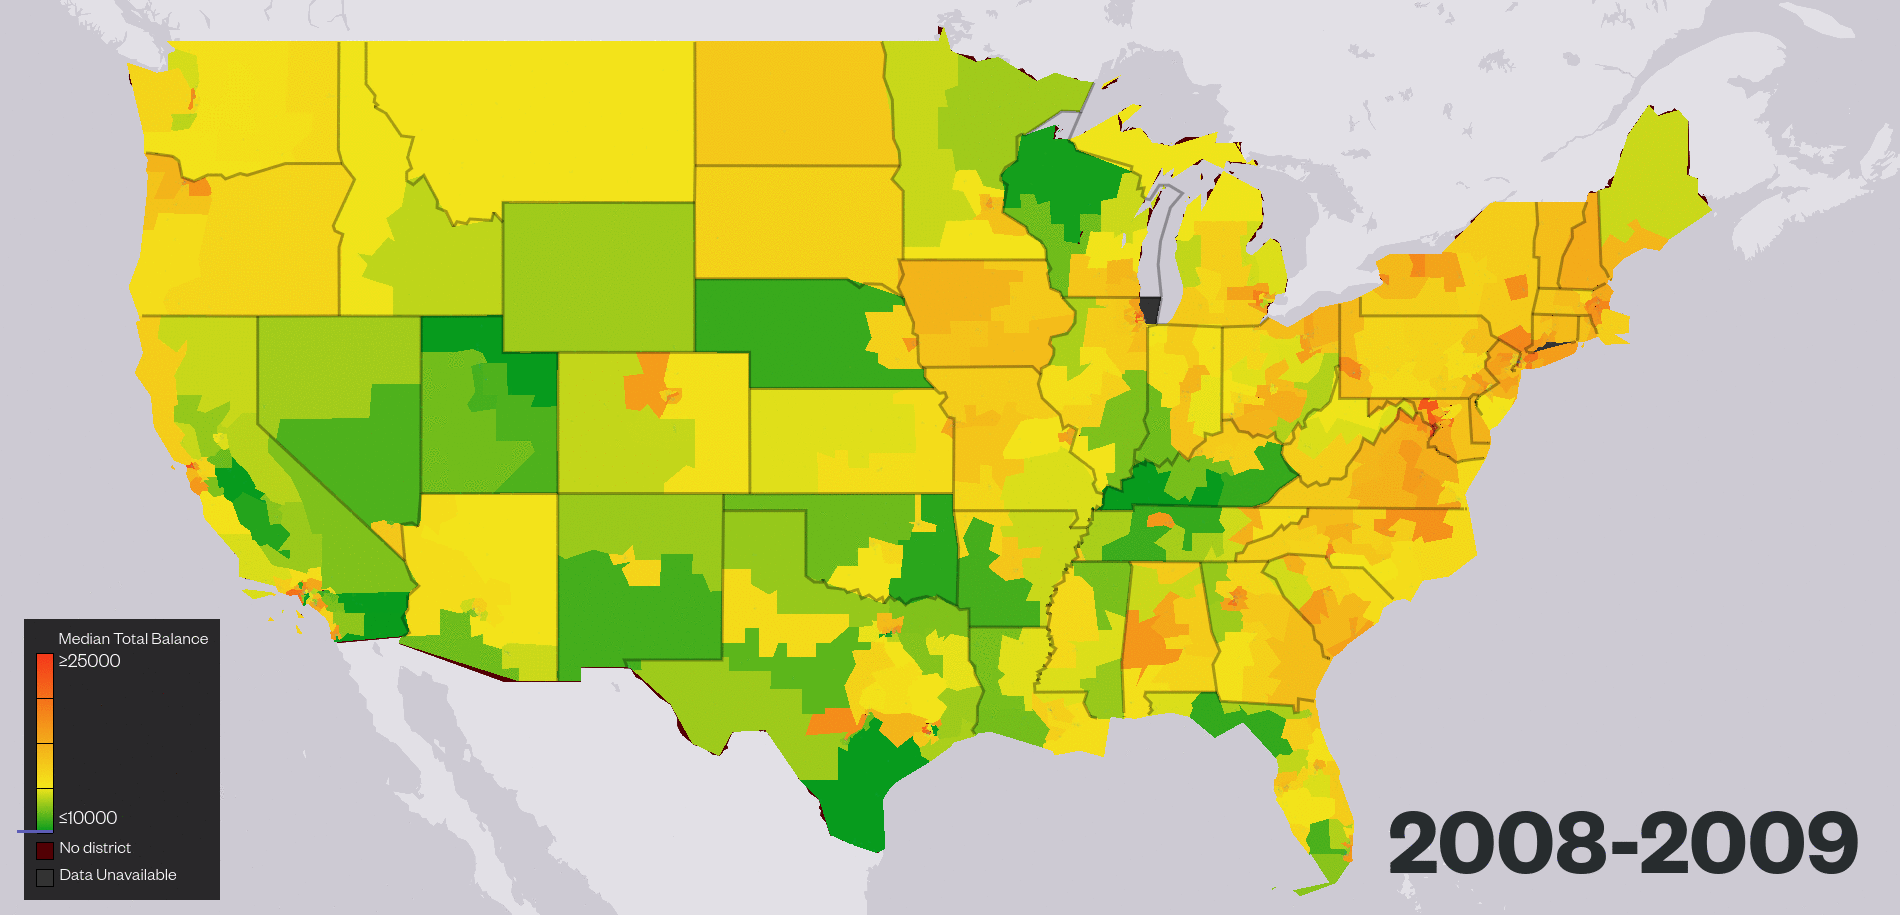 Map of changing average debt levels across the contiguous US